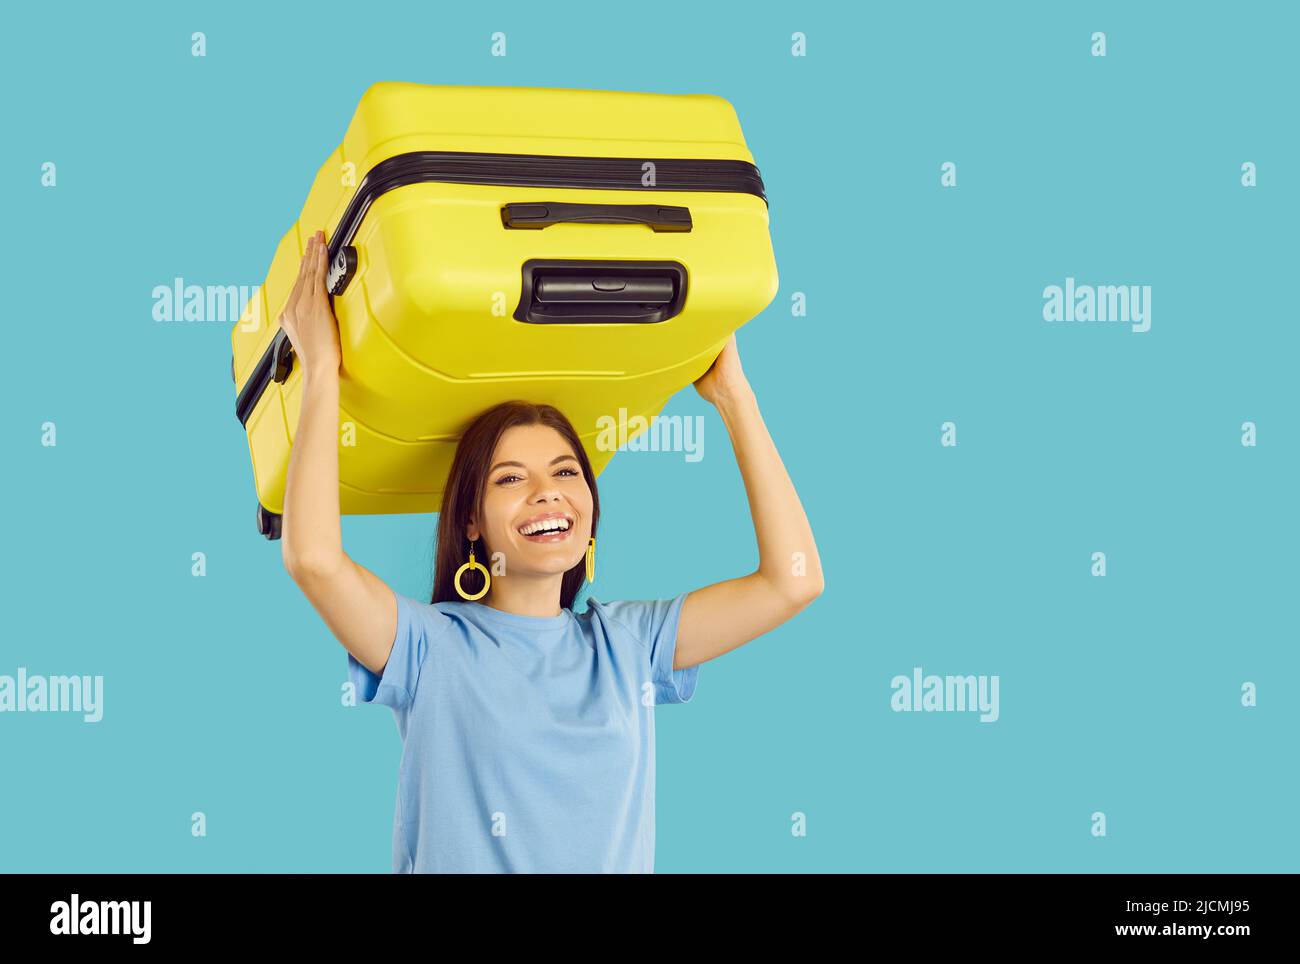 Cheerful woman who is going on holiday trip is carrying her yellow suitcase and laughing Stock Photo